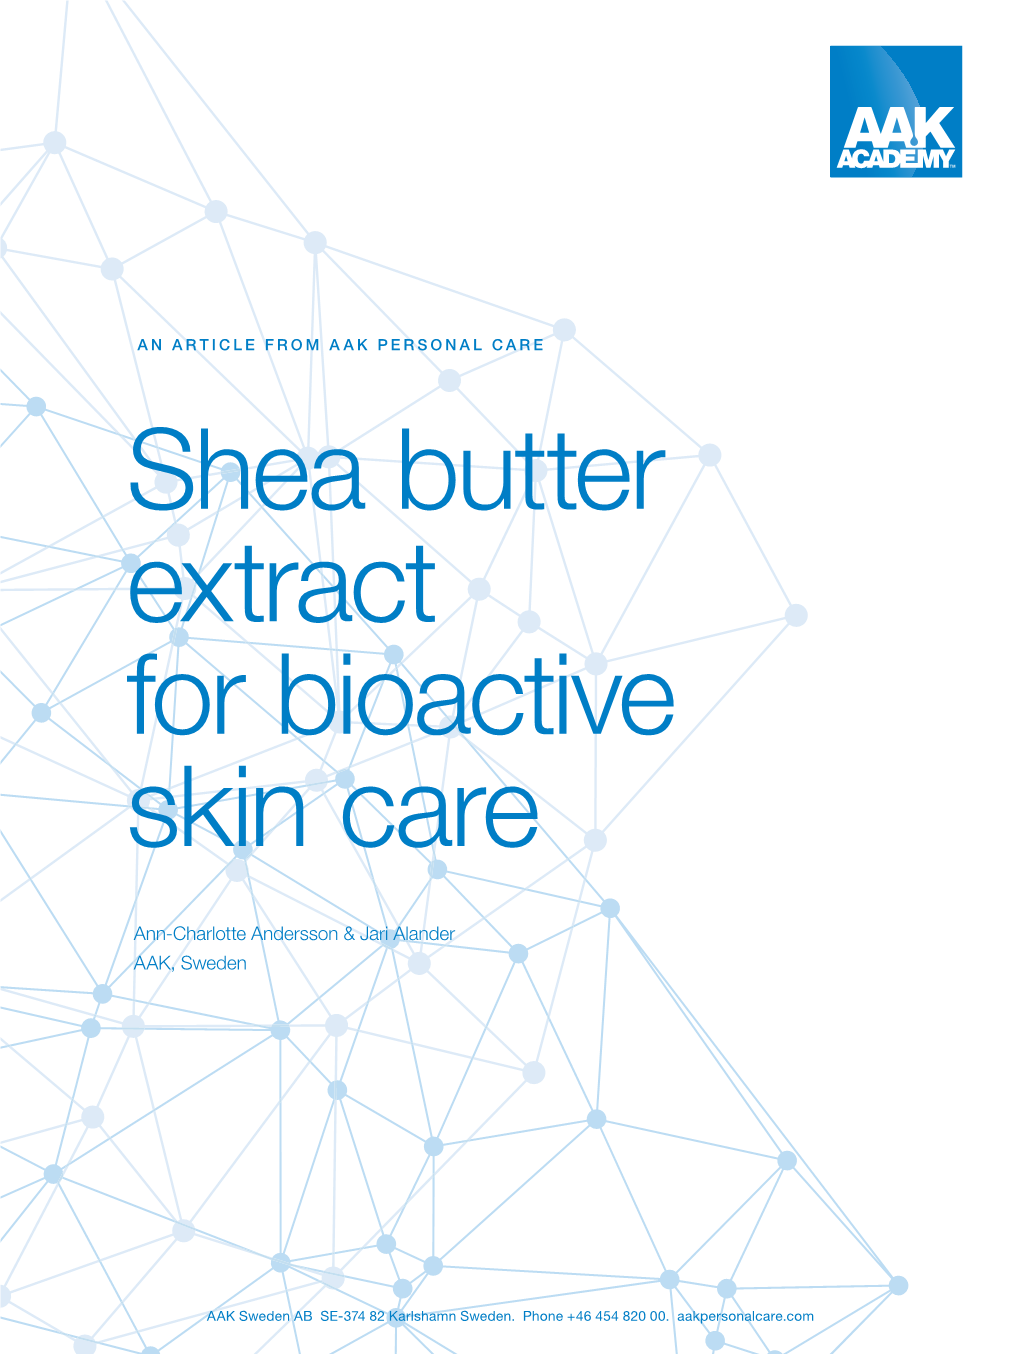 Shea Butter Extract for Bioactive Skin Care